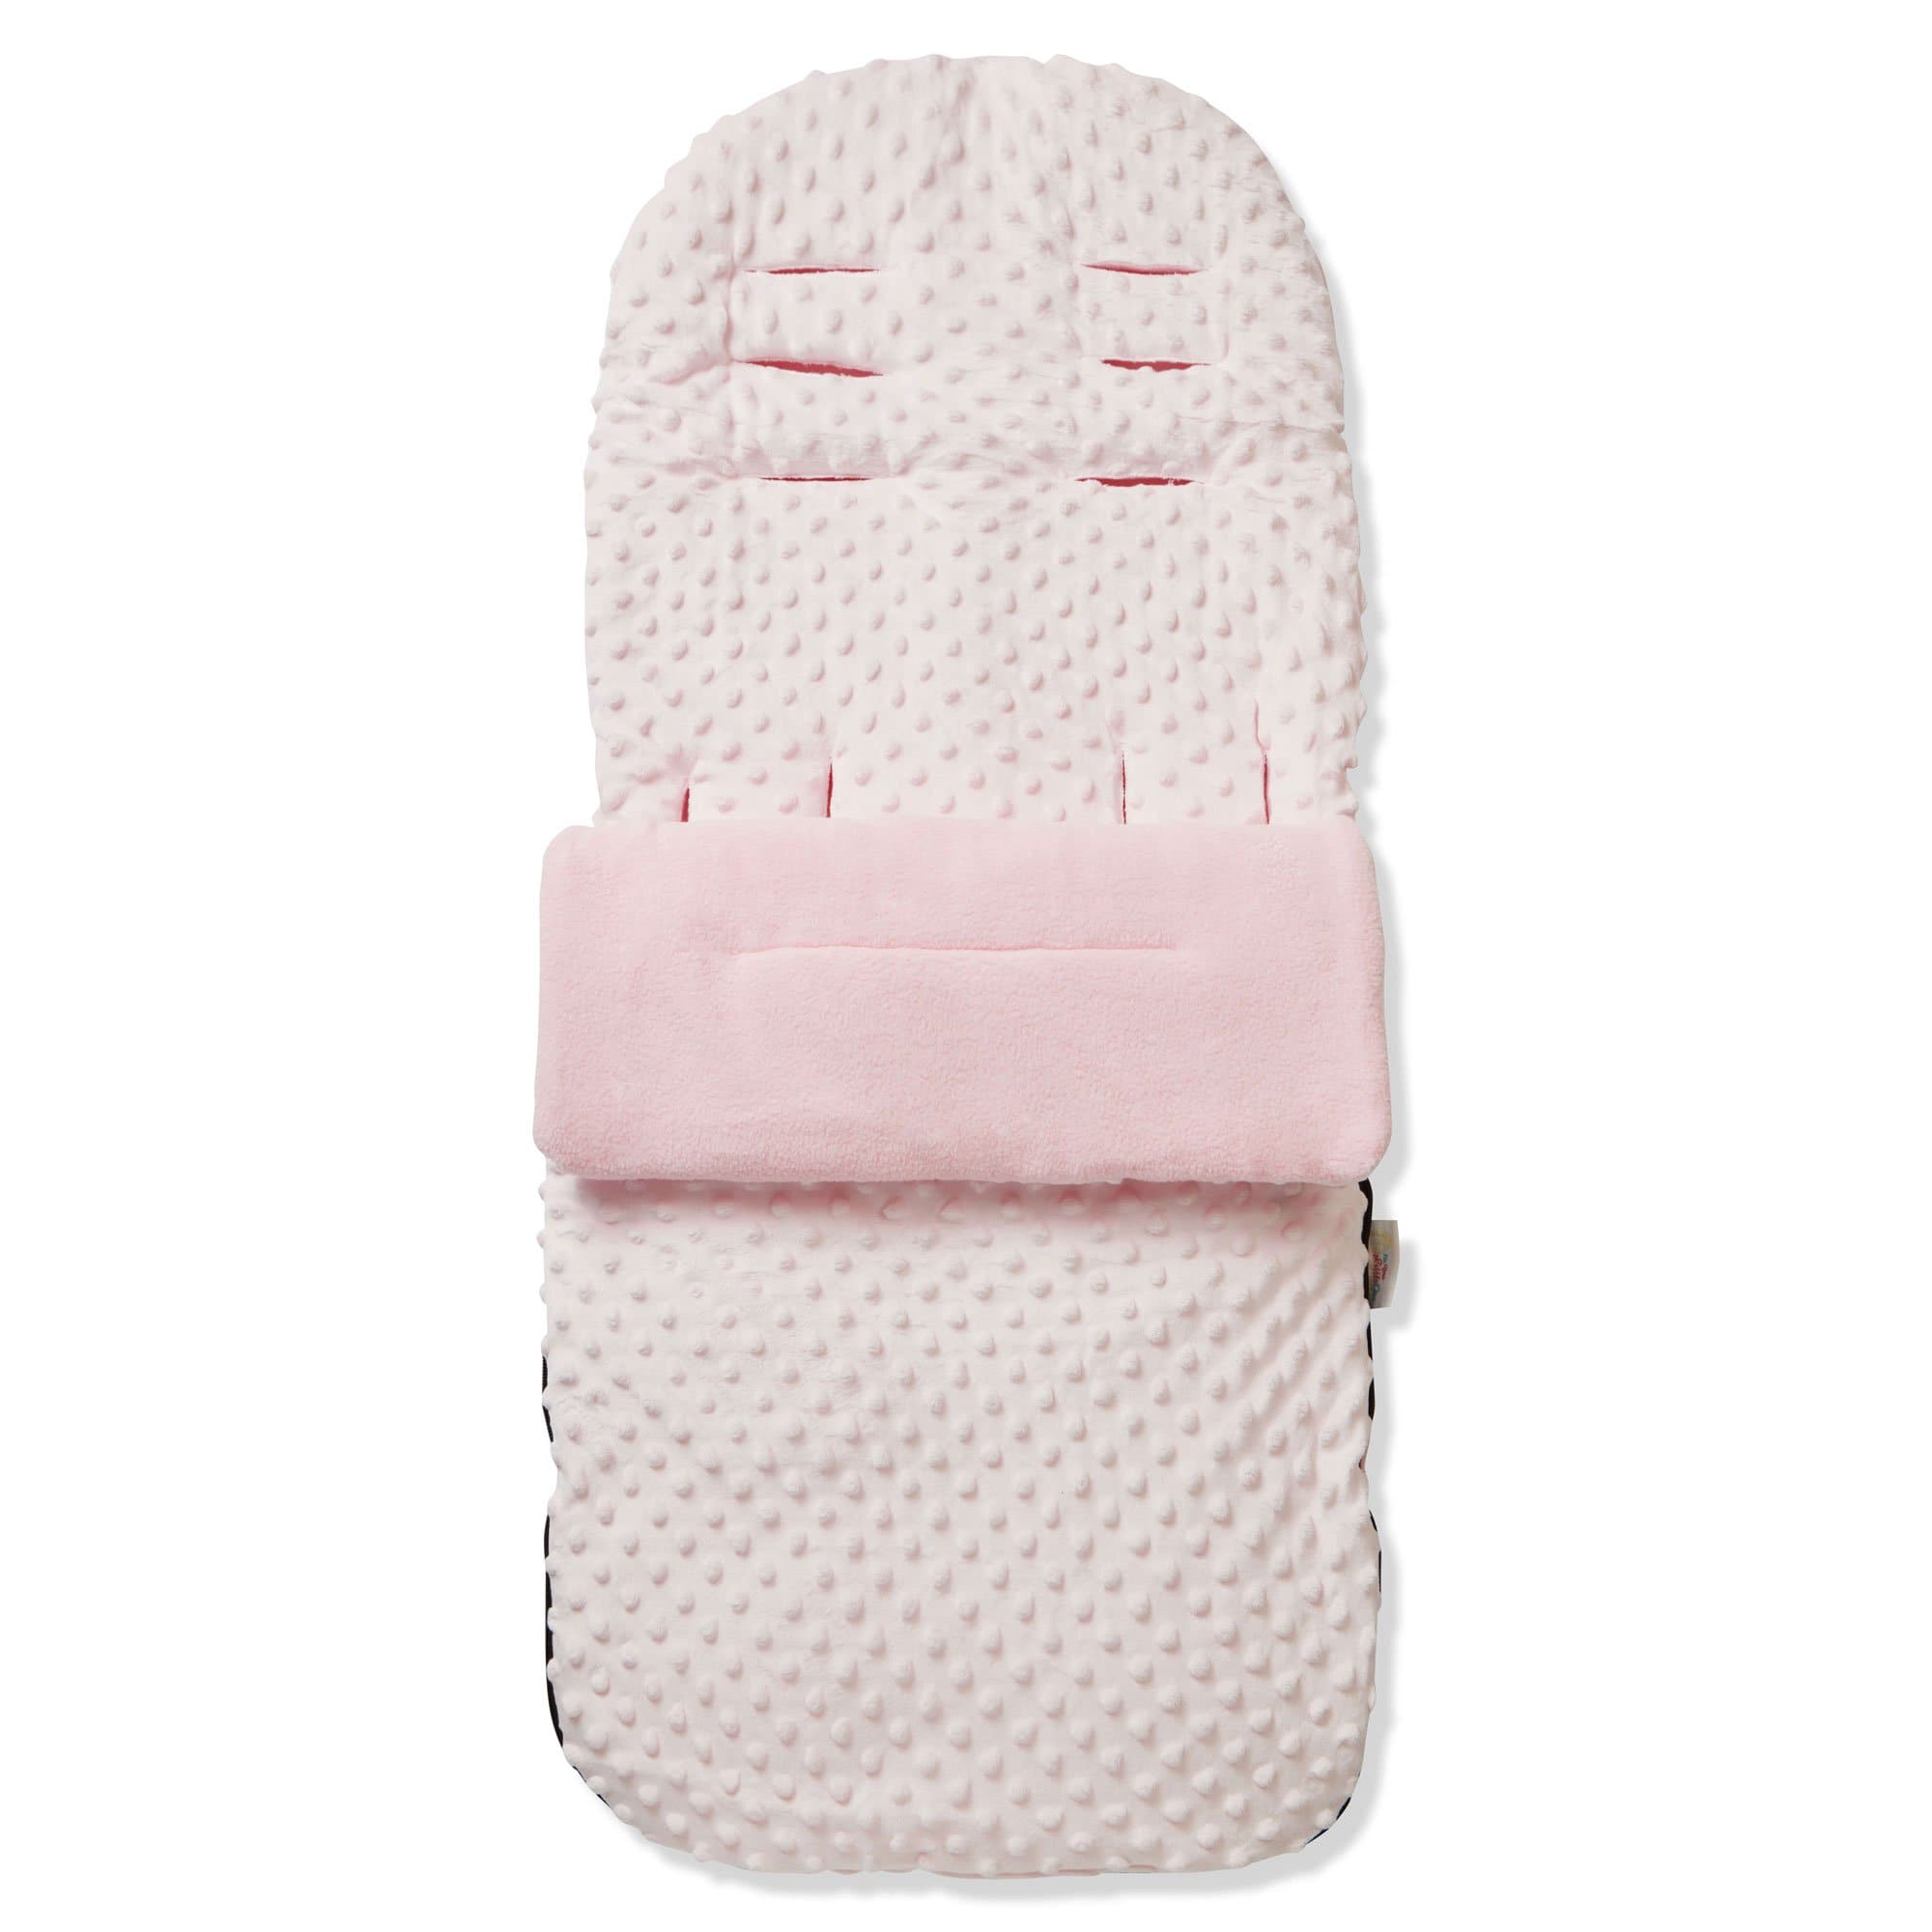 Dimple Footmuff / Cosy Toes Compatible with Babyzen - Pink / Fits All Models | For Your Little One